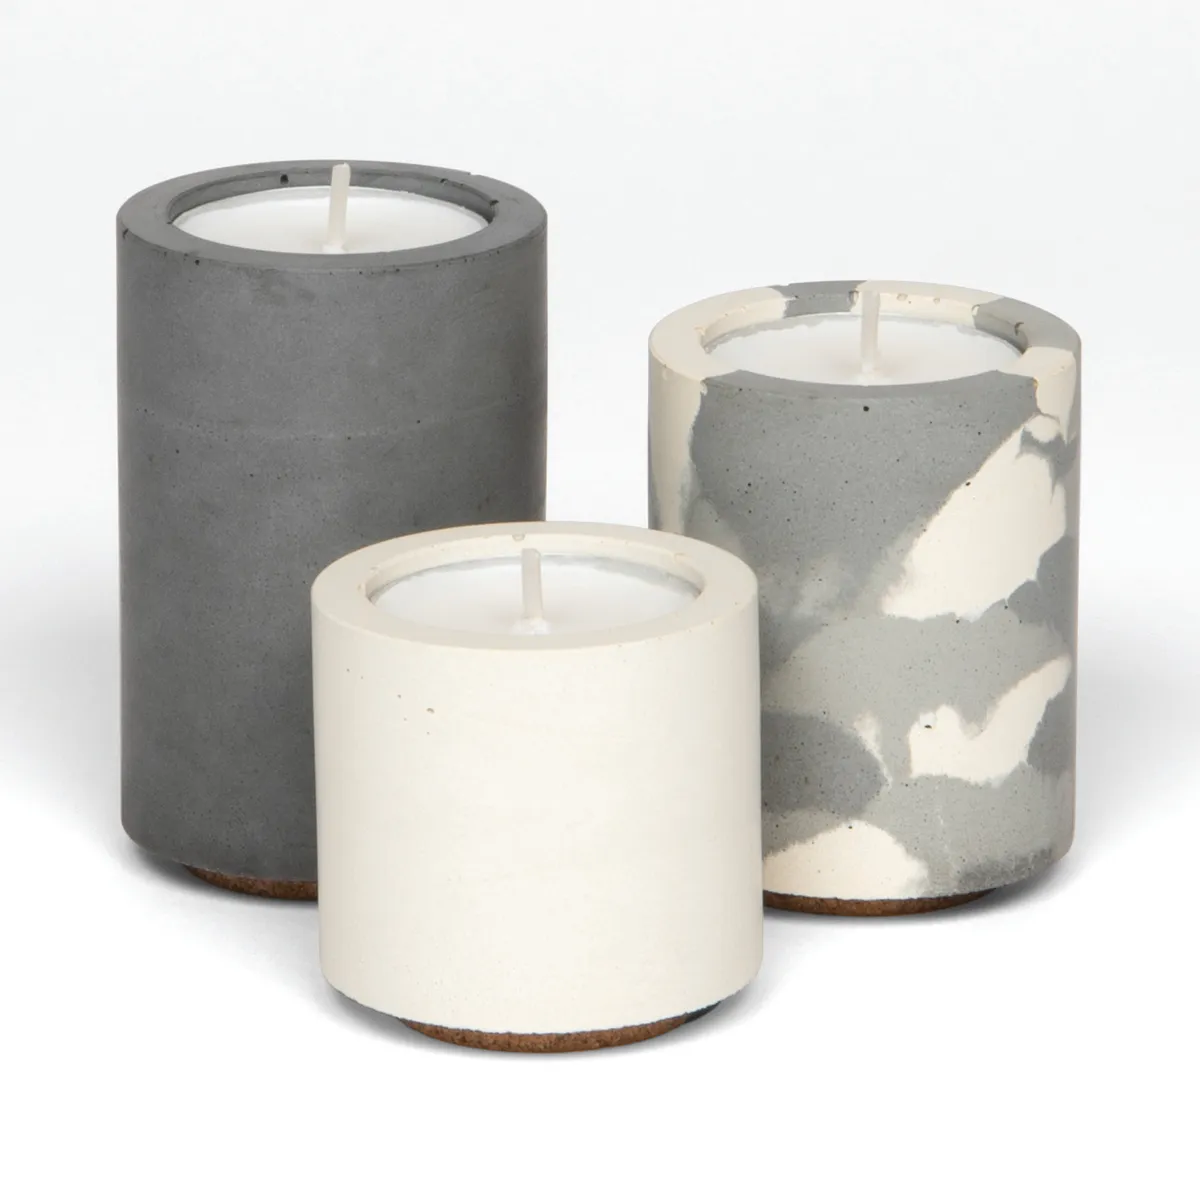 Try the industrial trend with textured concrete holders. Tealight trio, £35, Concrete & Wax